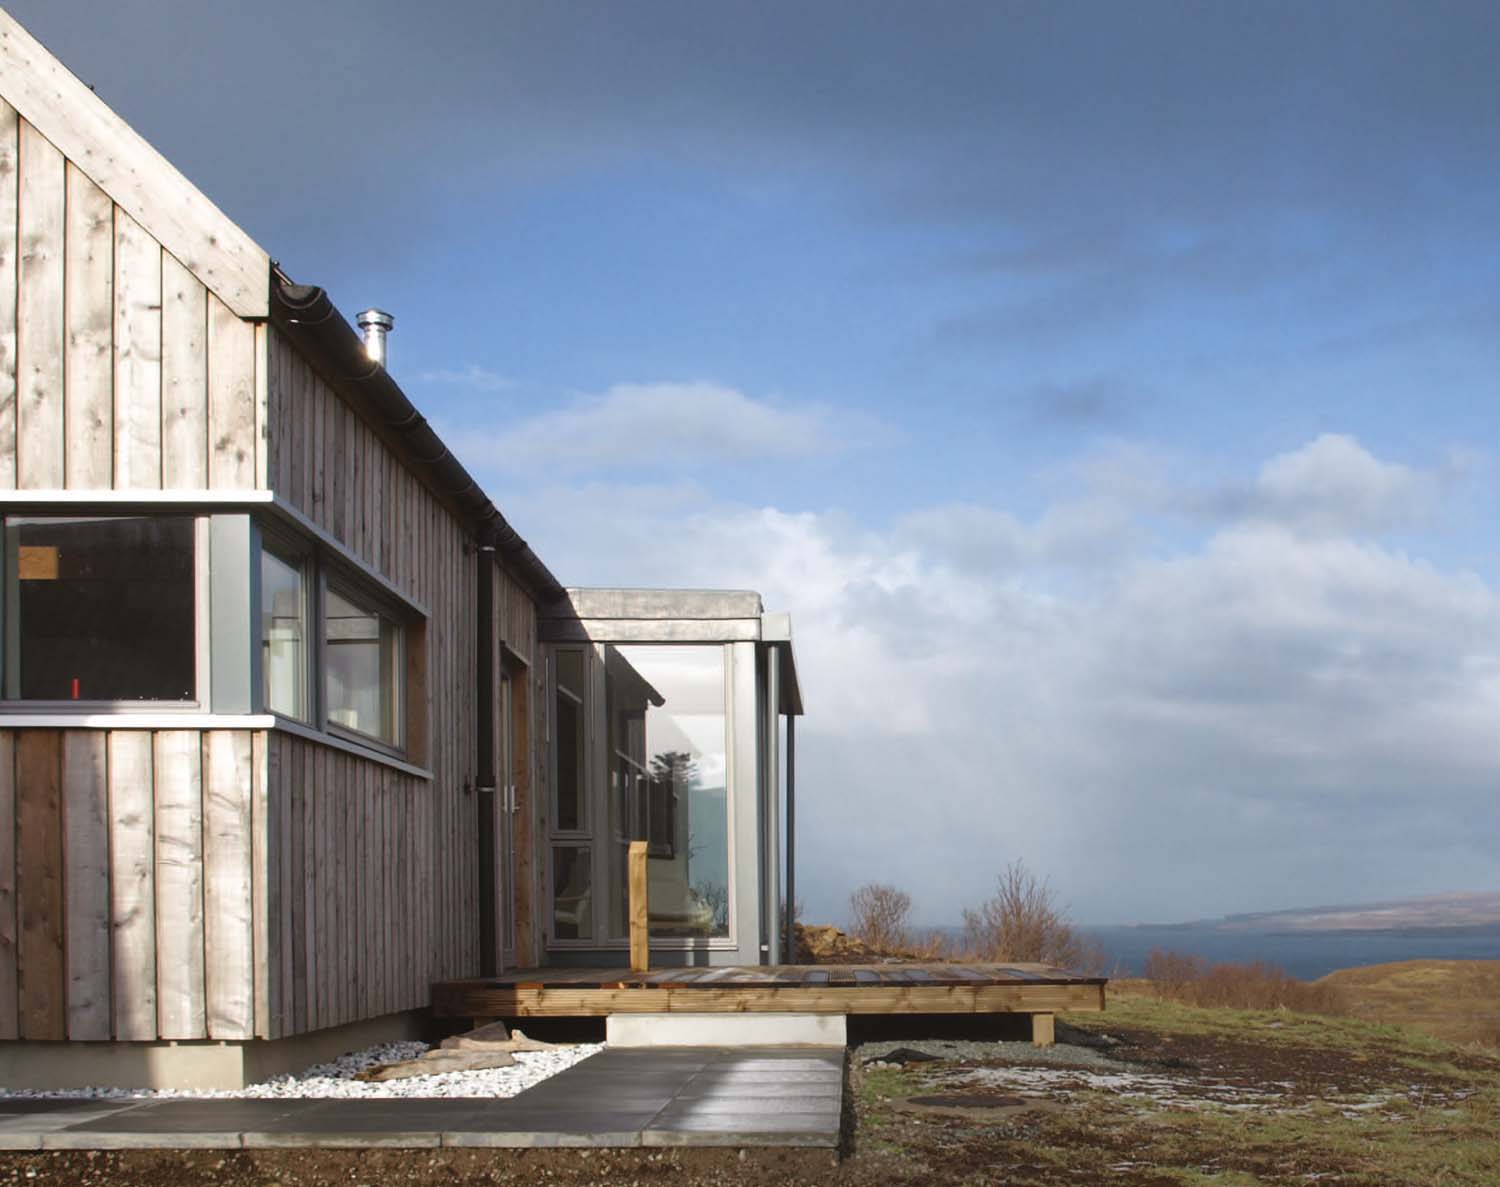 The outdoor decking and an extension at the Long House overlooking the sea and its rural landscape. Large windows frame the extension's walls.